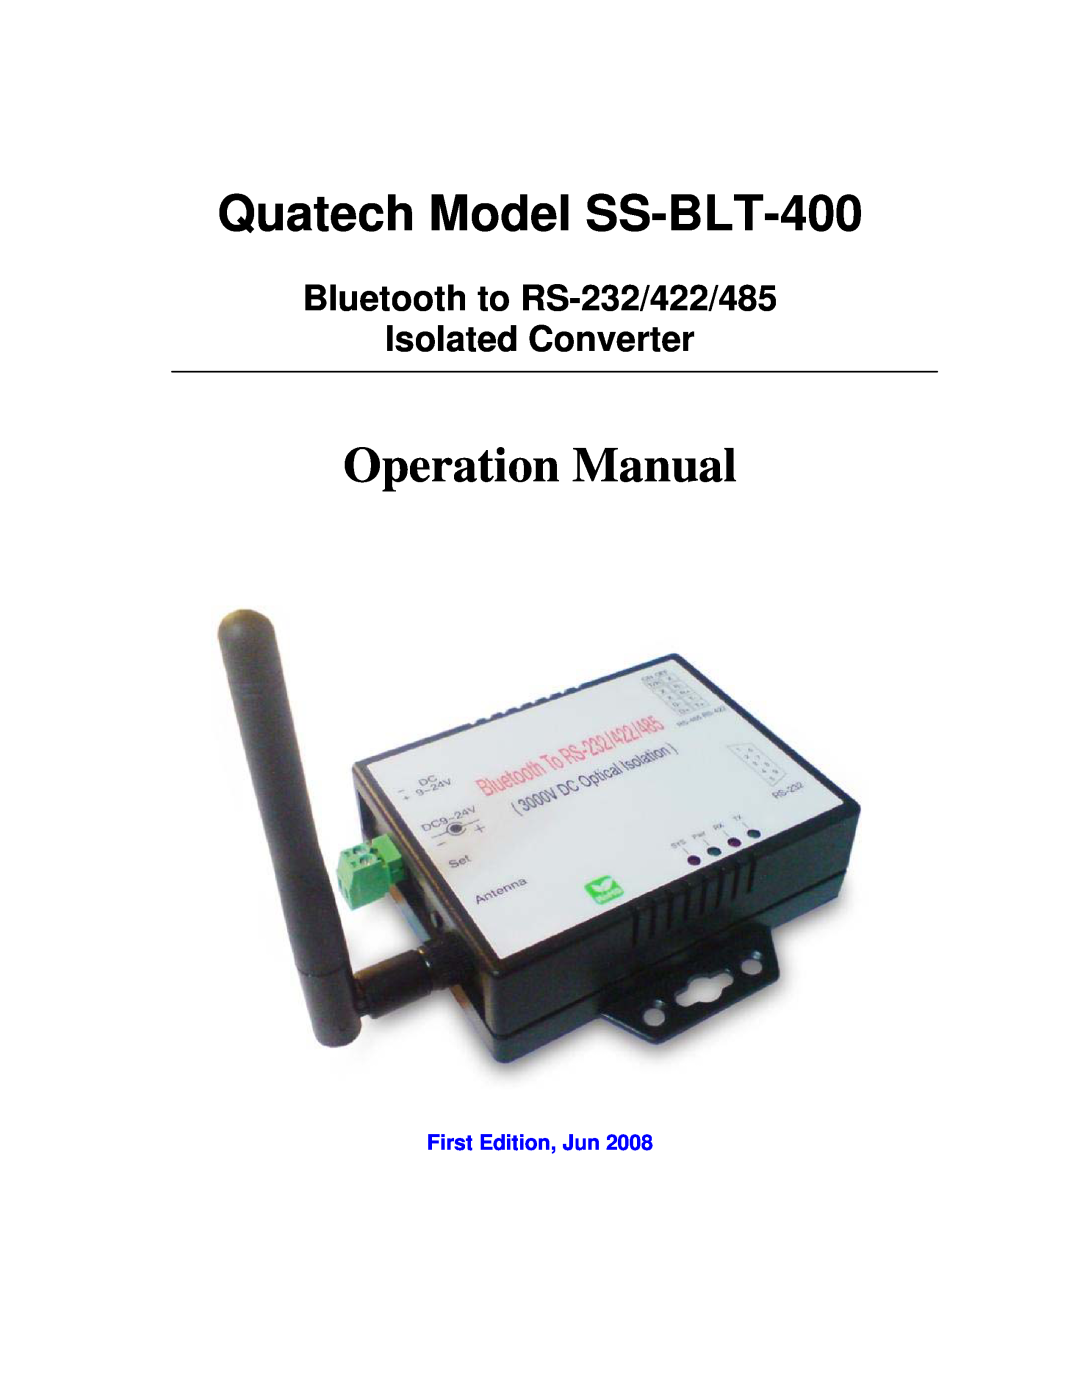 Quatech operation manual Quatech Model SS-BLT-400, Operation Manual, Bluetooth to RS-232/422/485 Isolated Converter 